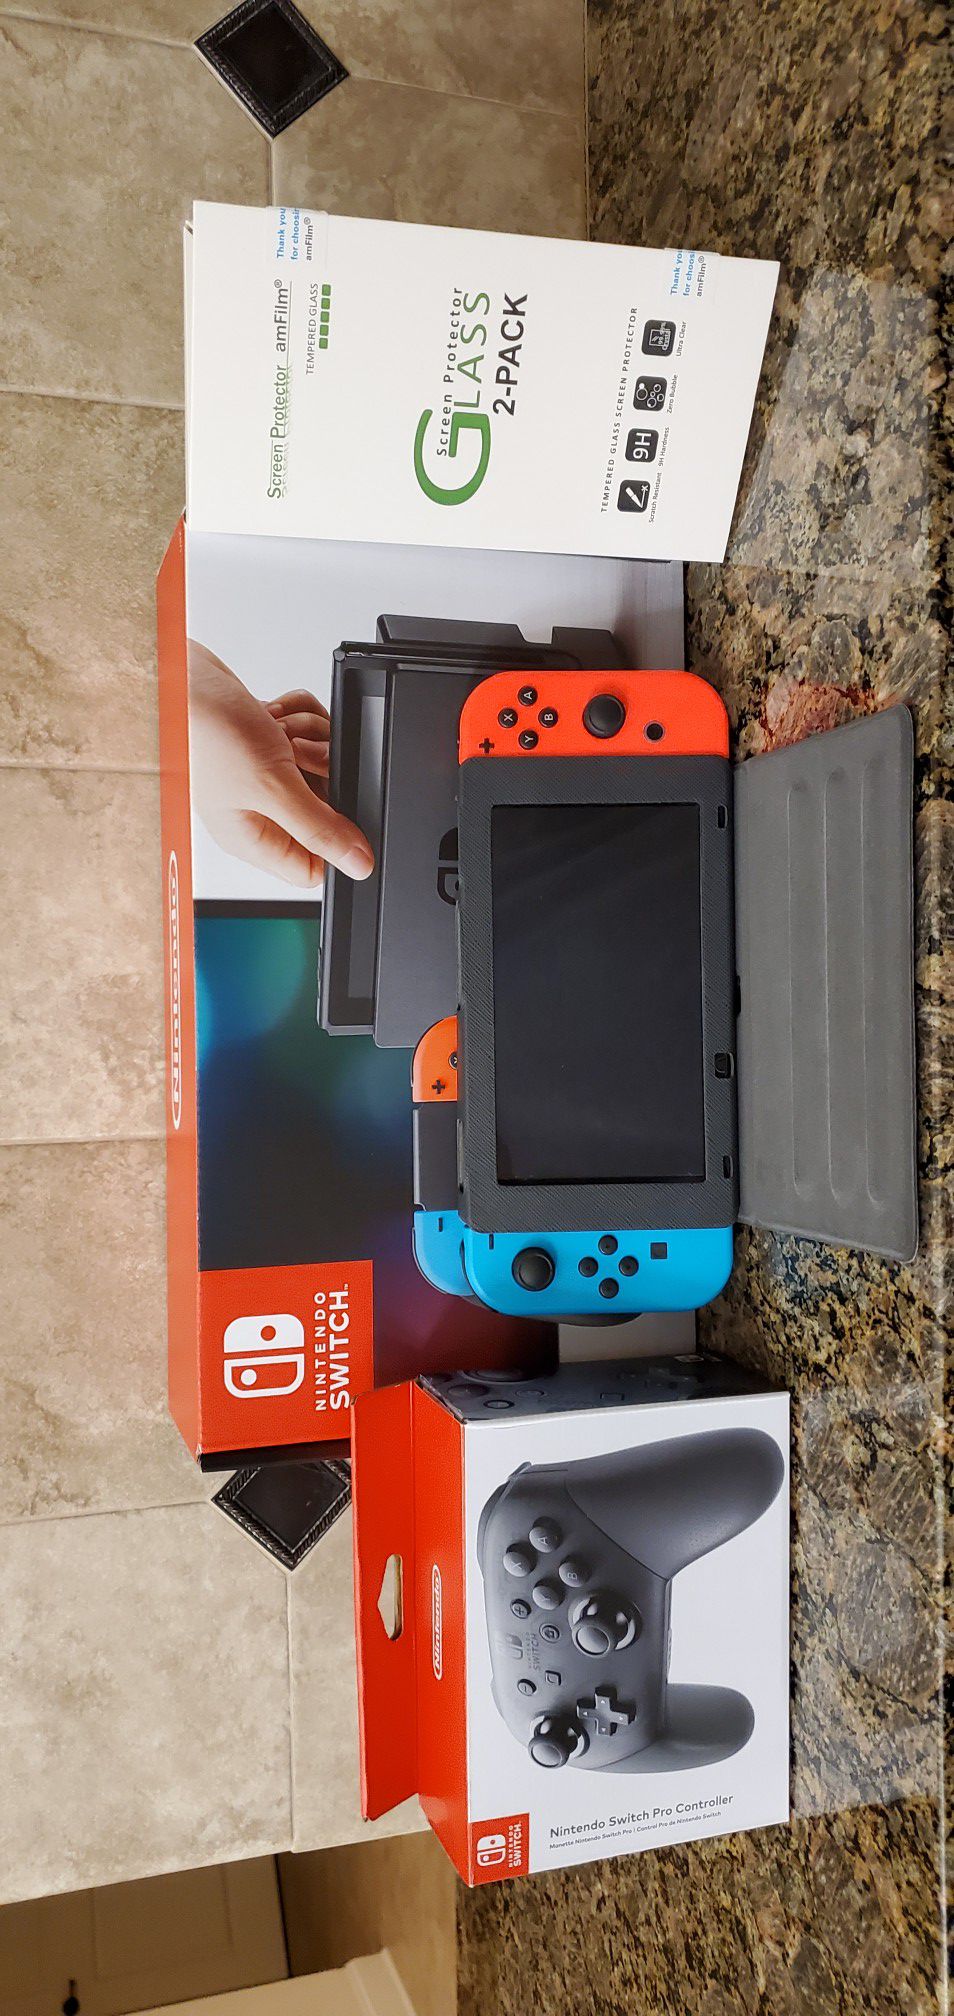 Nintendo Switch with Pro controller and extras